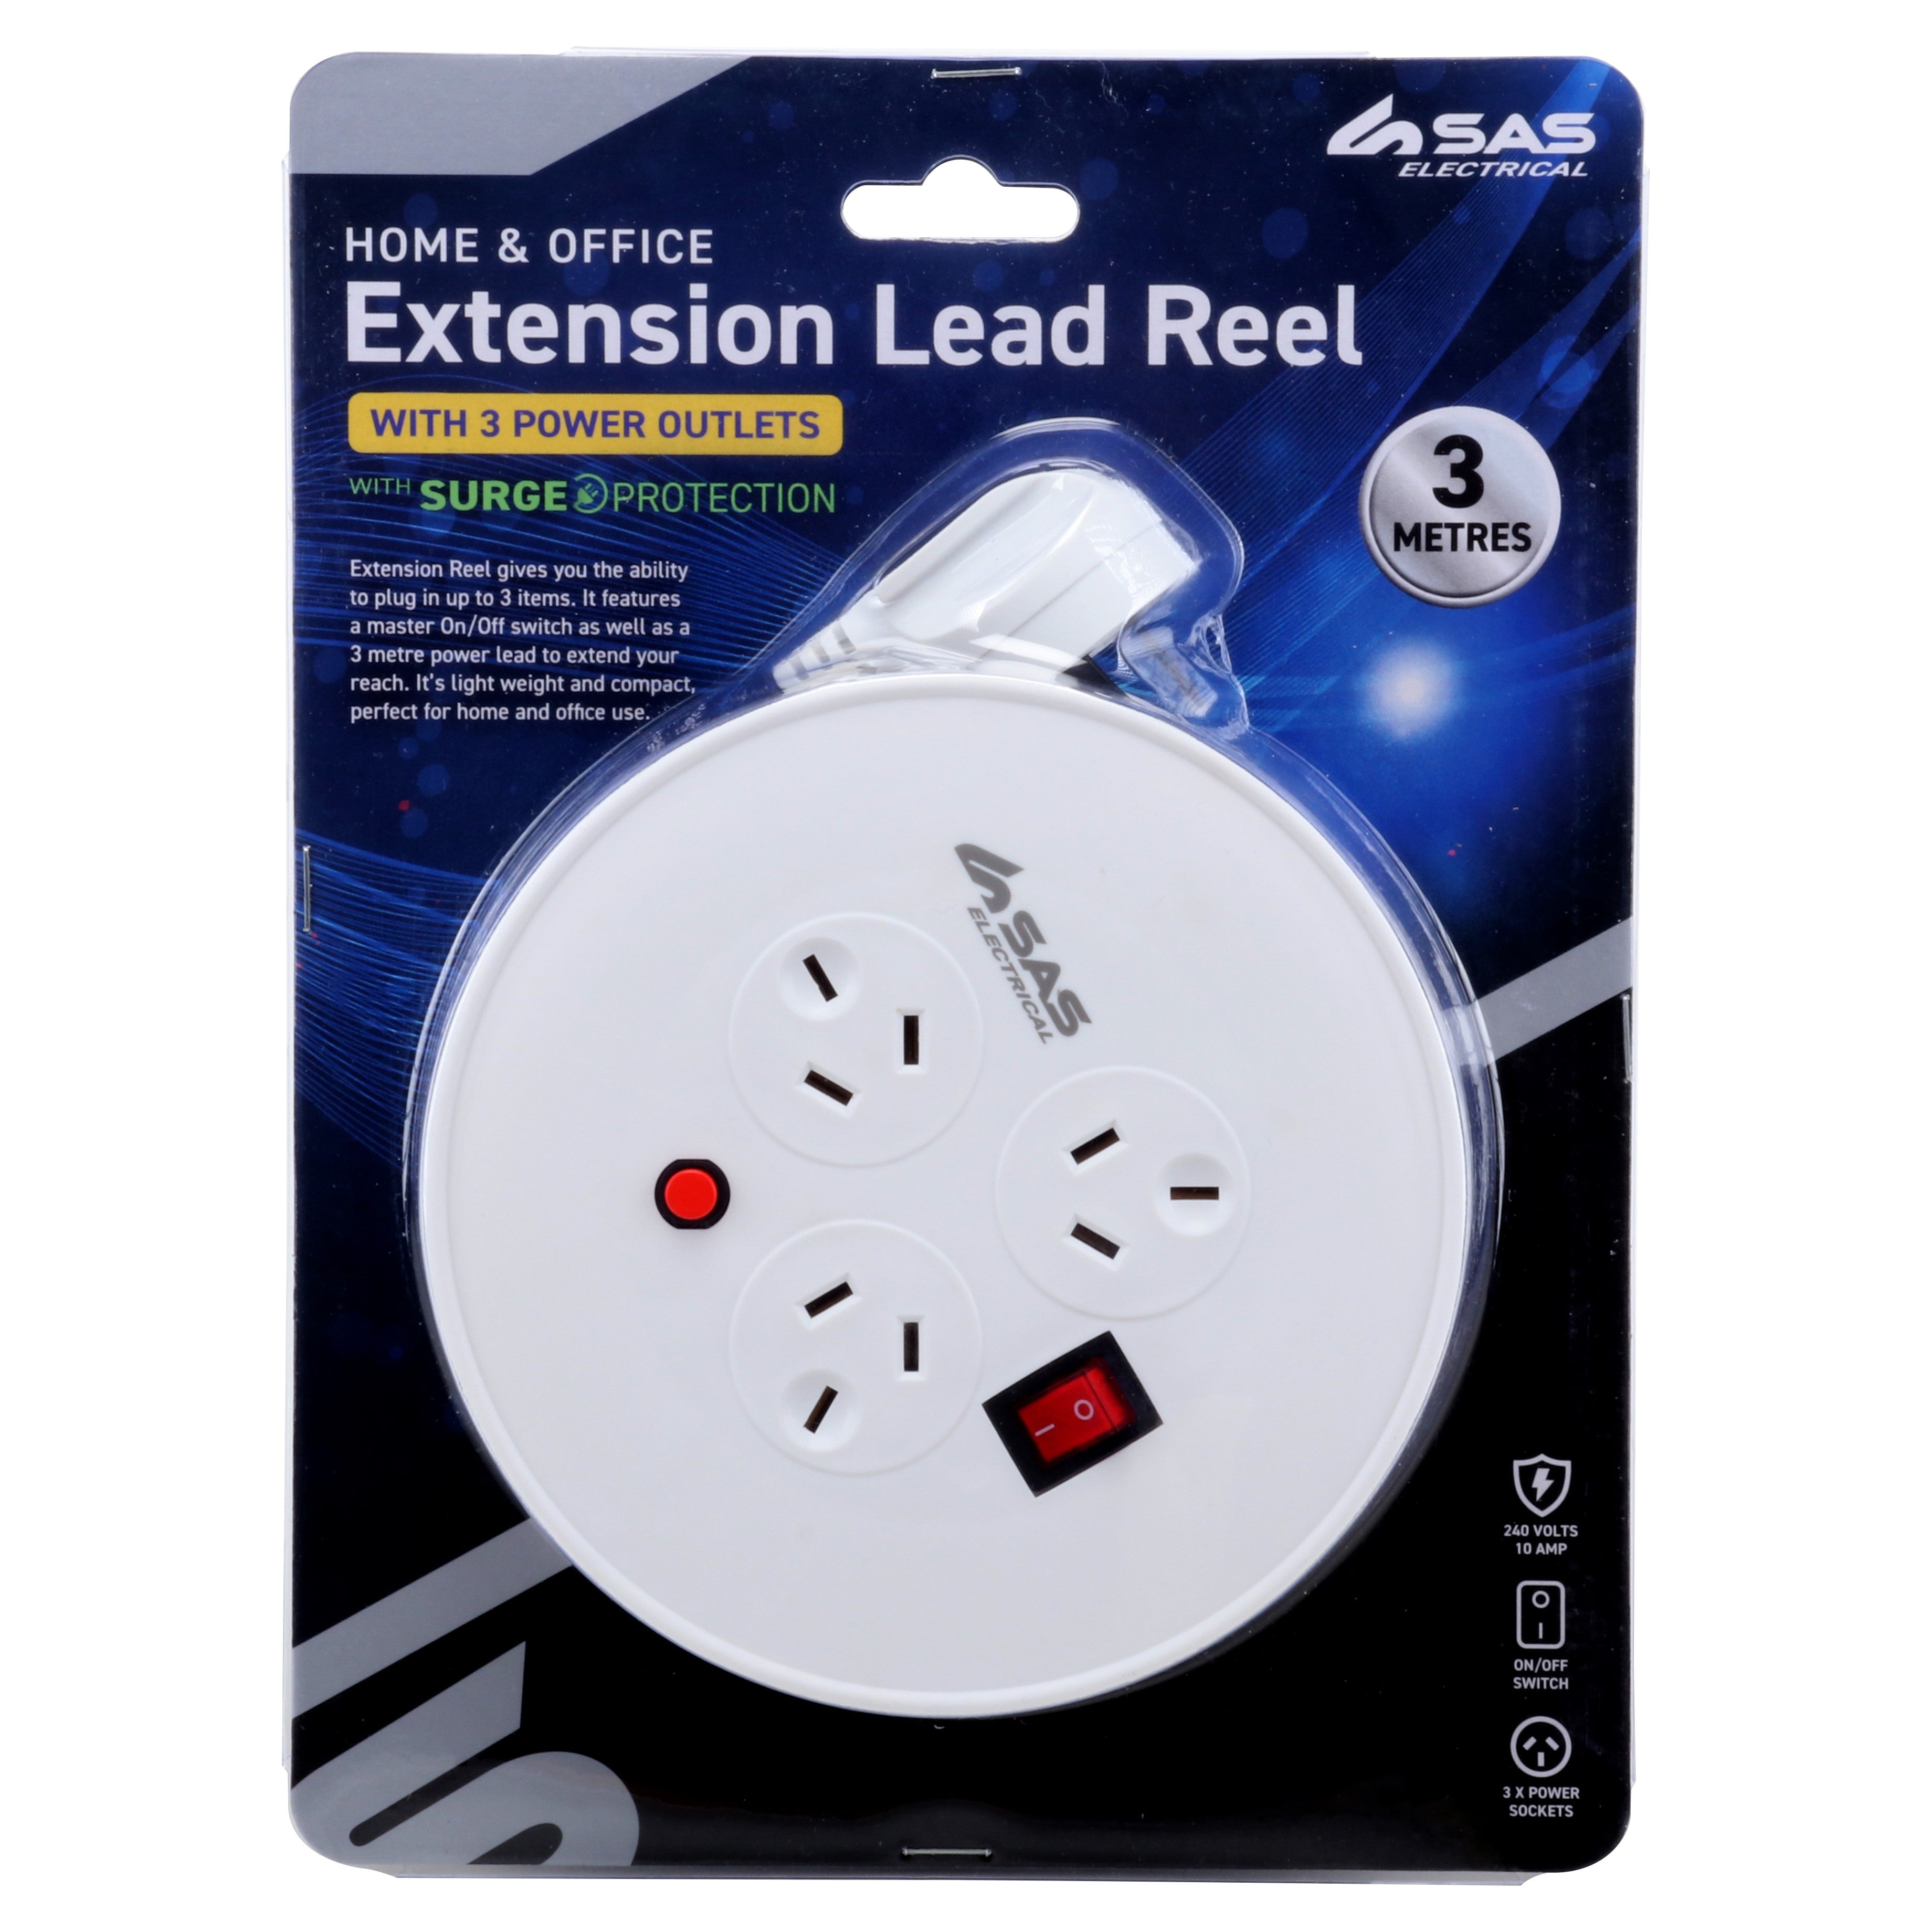 Home and Office Extension Lead Reel - 3m - Dollars and Sense